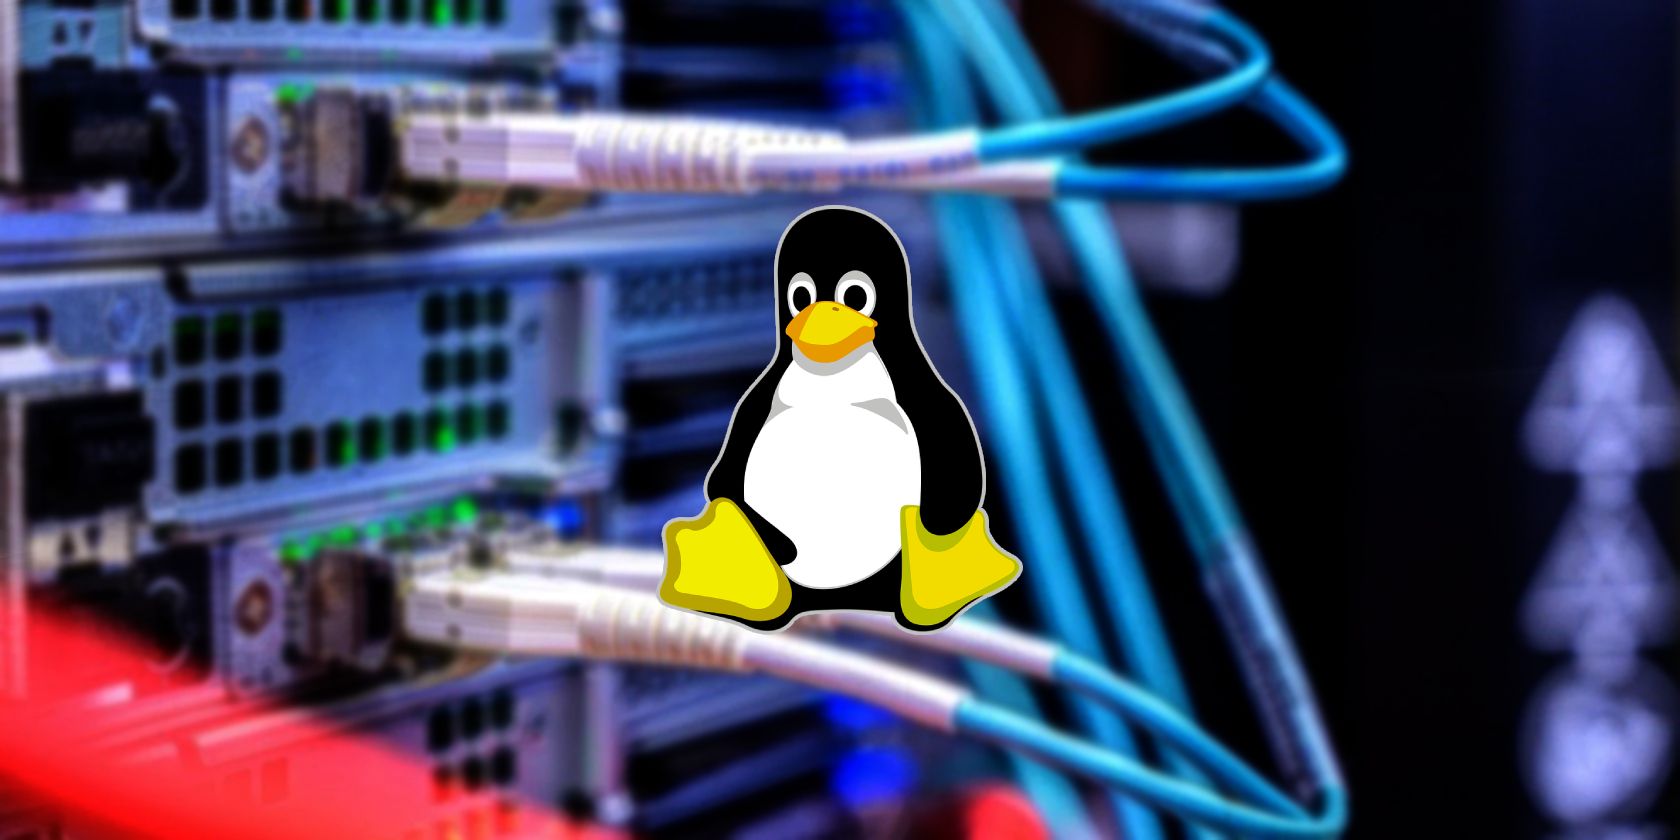 linux tux on a background image with servers